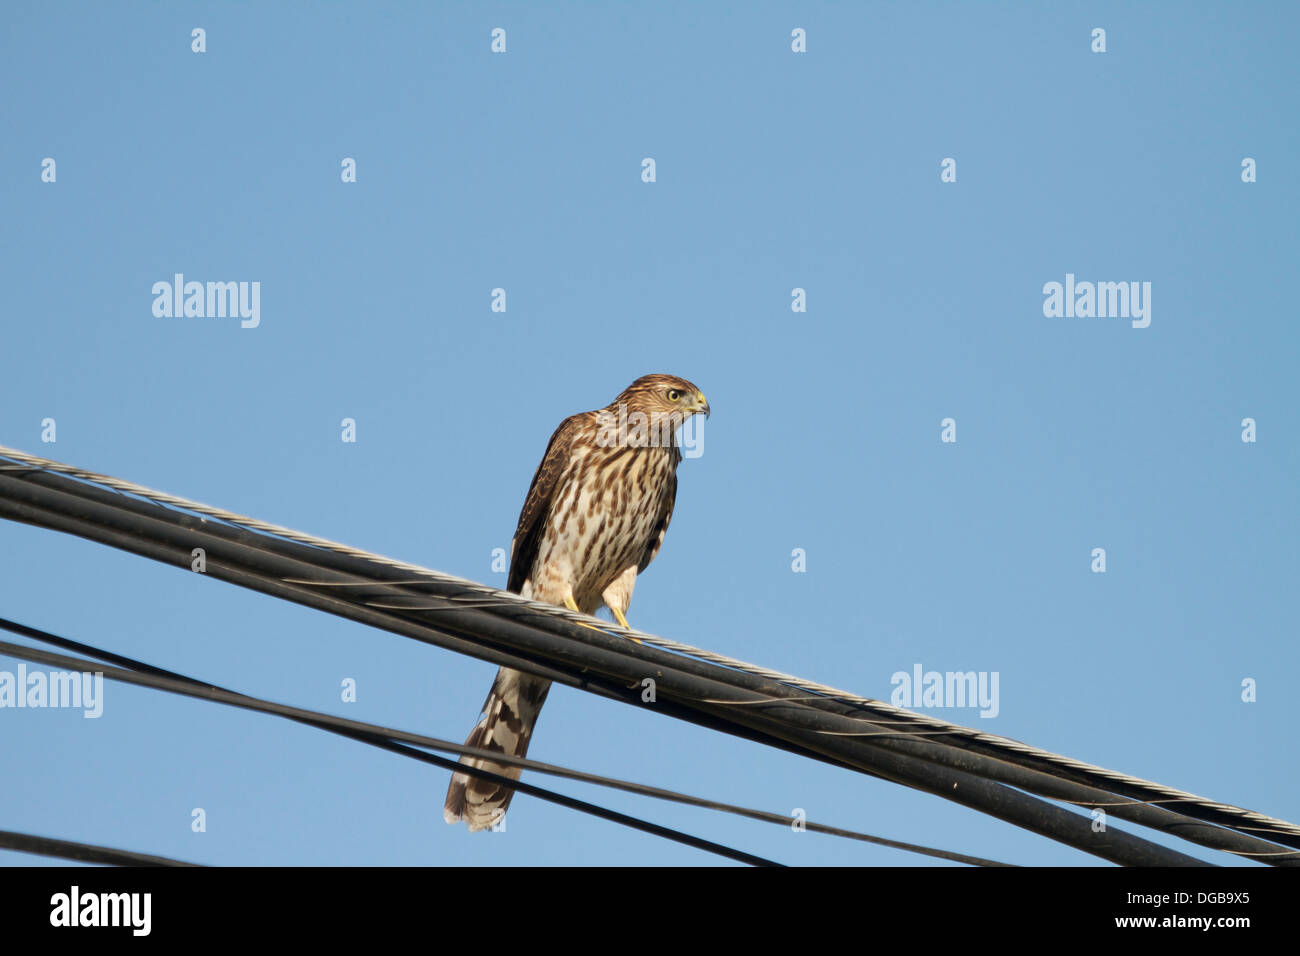 Coopers hawk Accipiter cooperii on power lines in an urban neighborhood Stock Photo